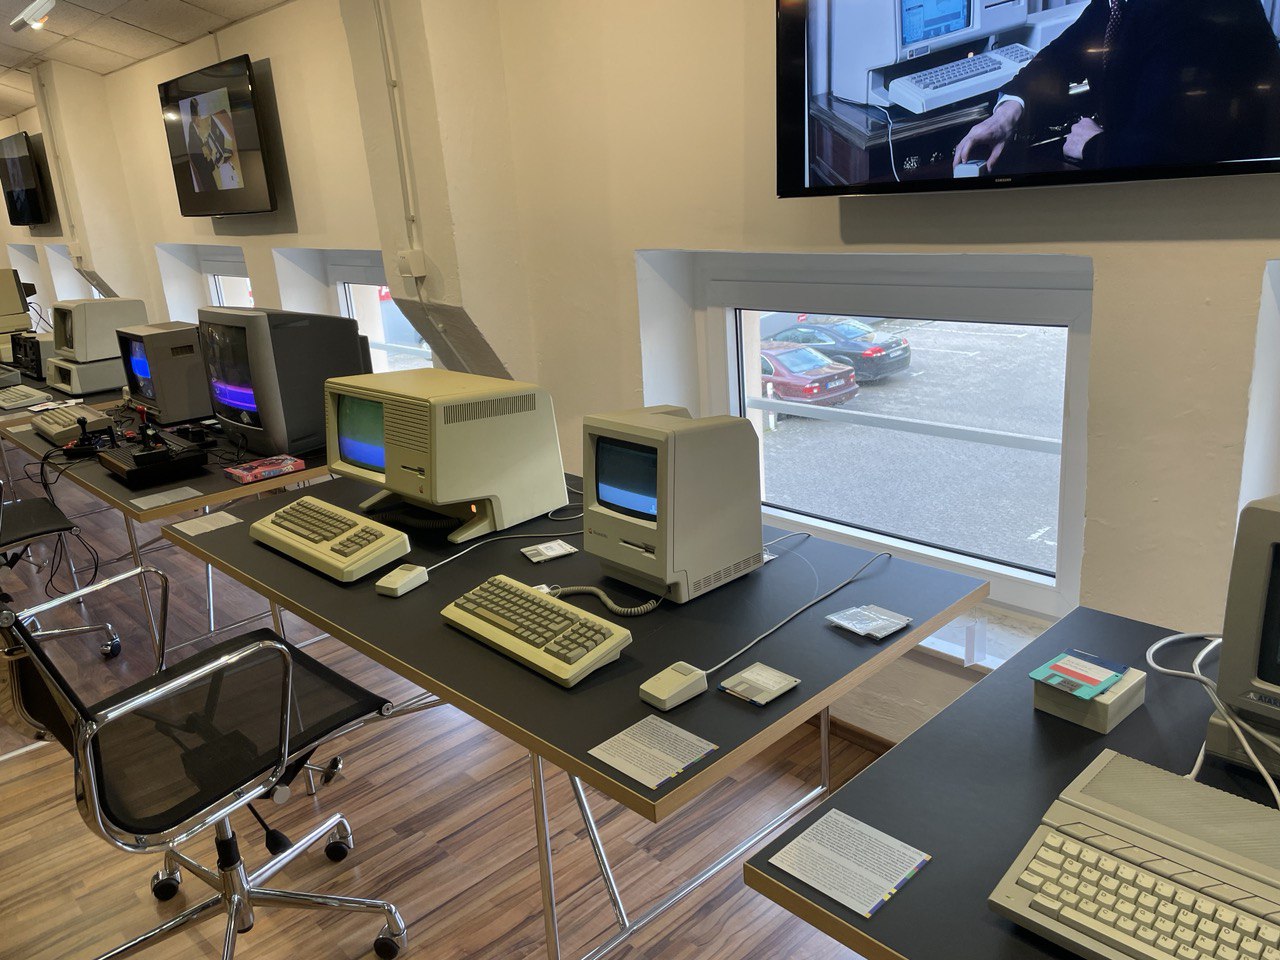 Lots of working computers from the 1980s